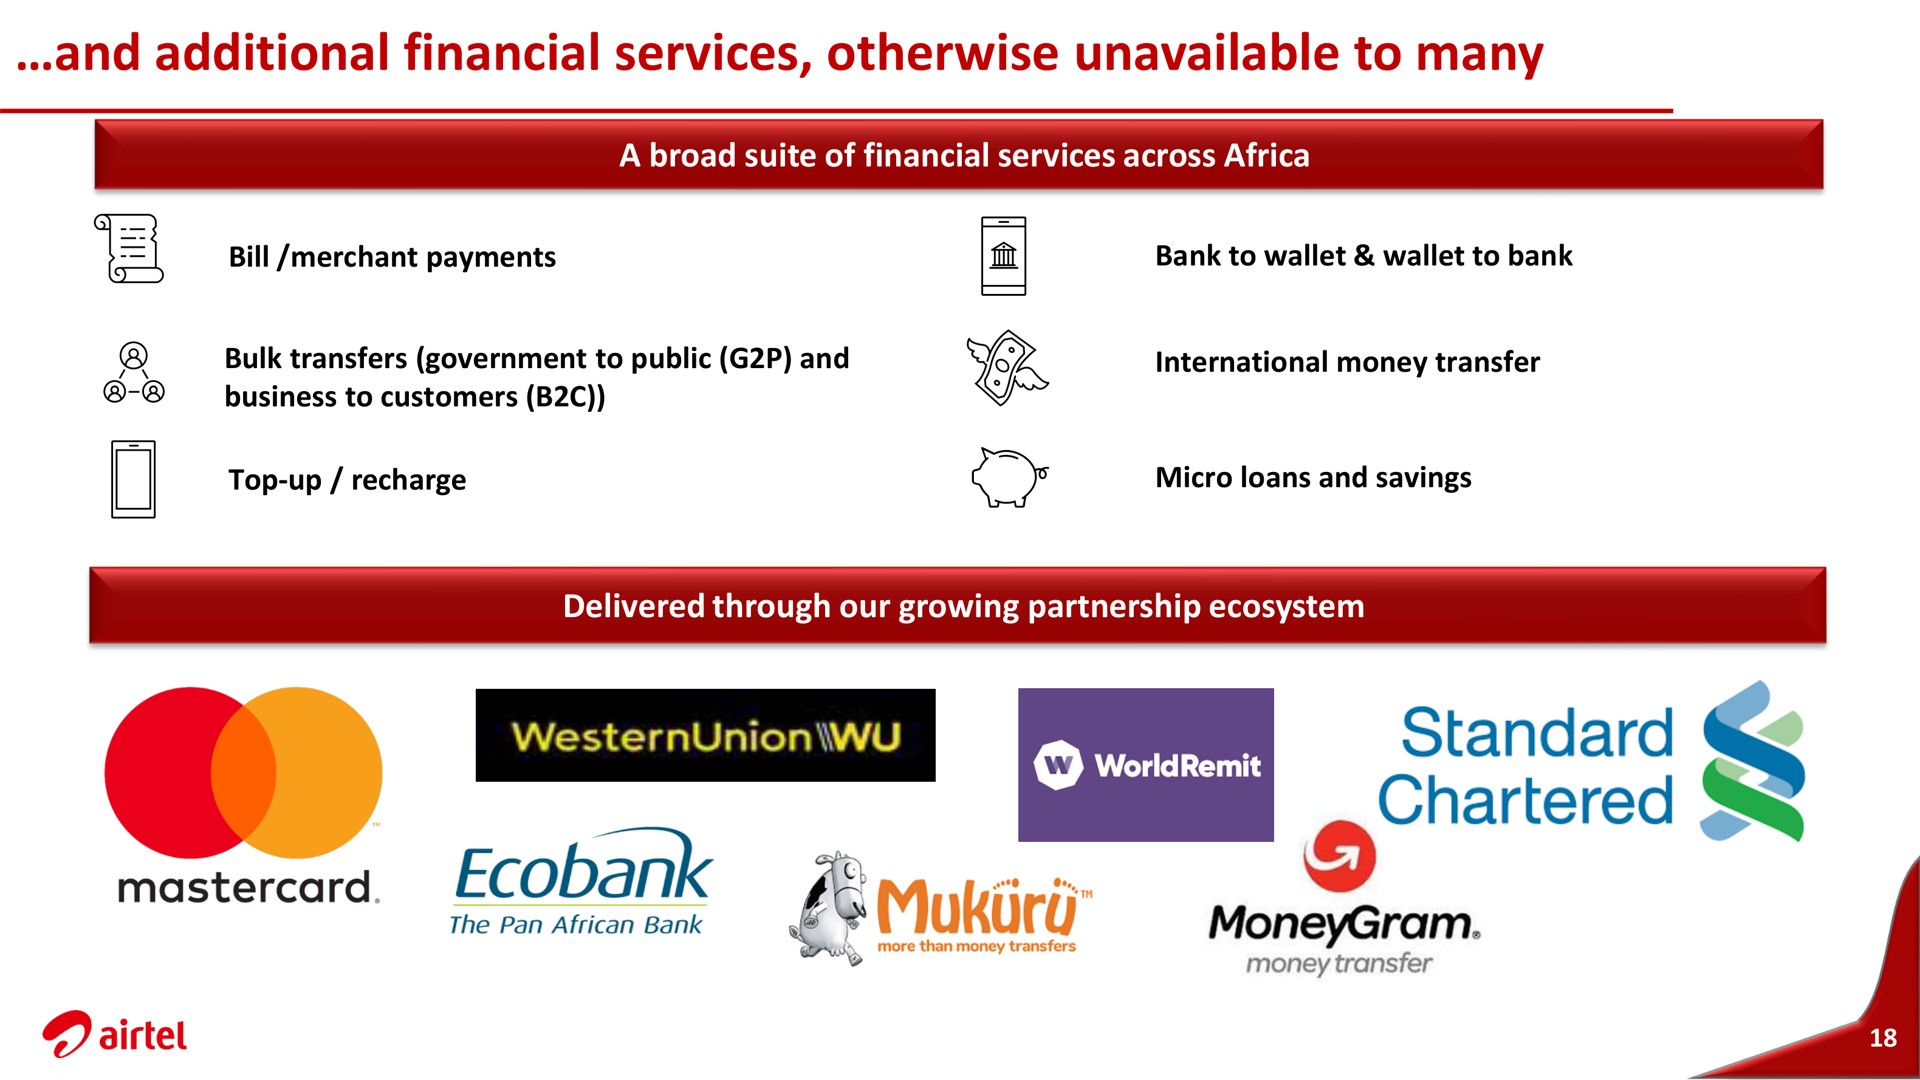 and additional financial services otherwise unavailable to many standard chartered | Airtel Africa